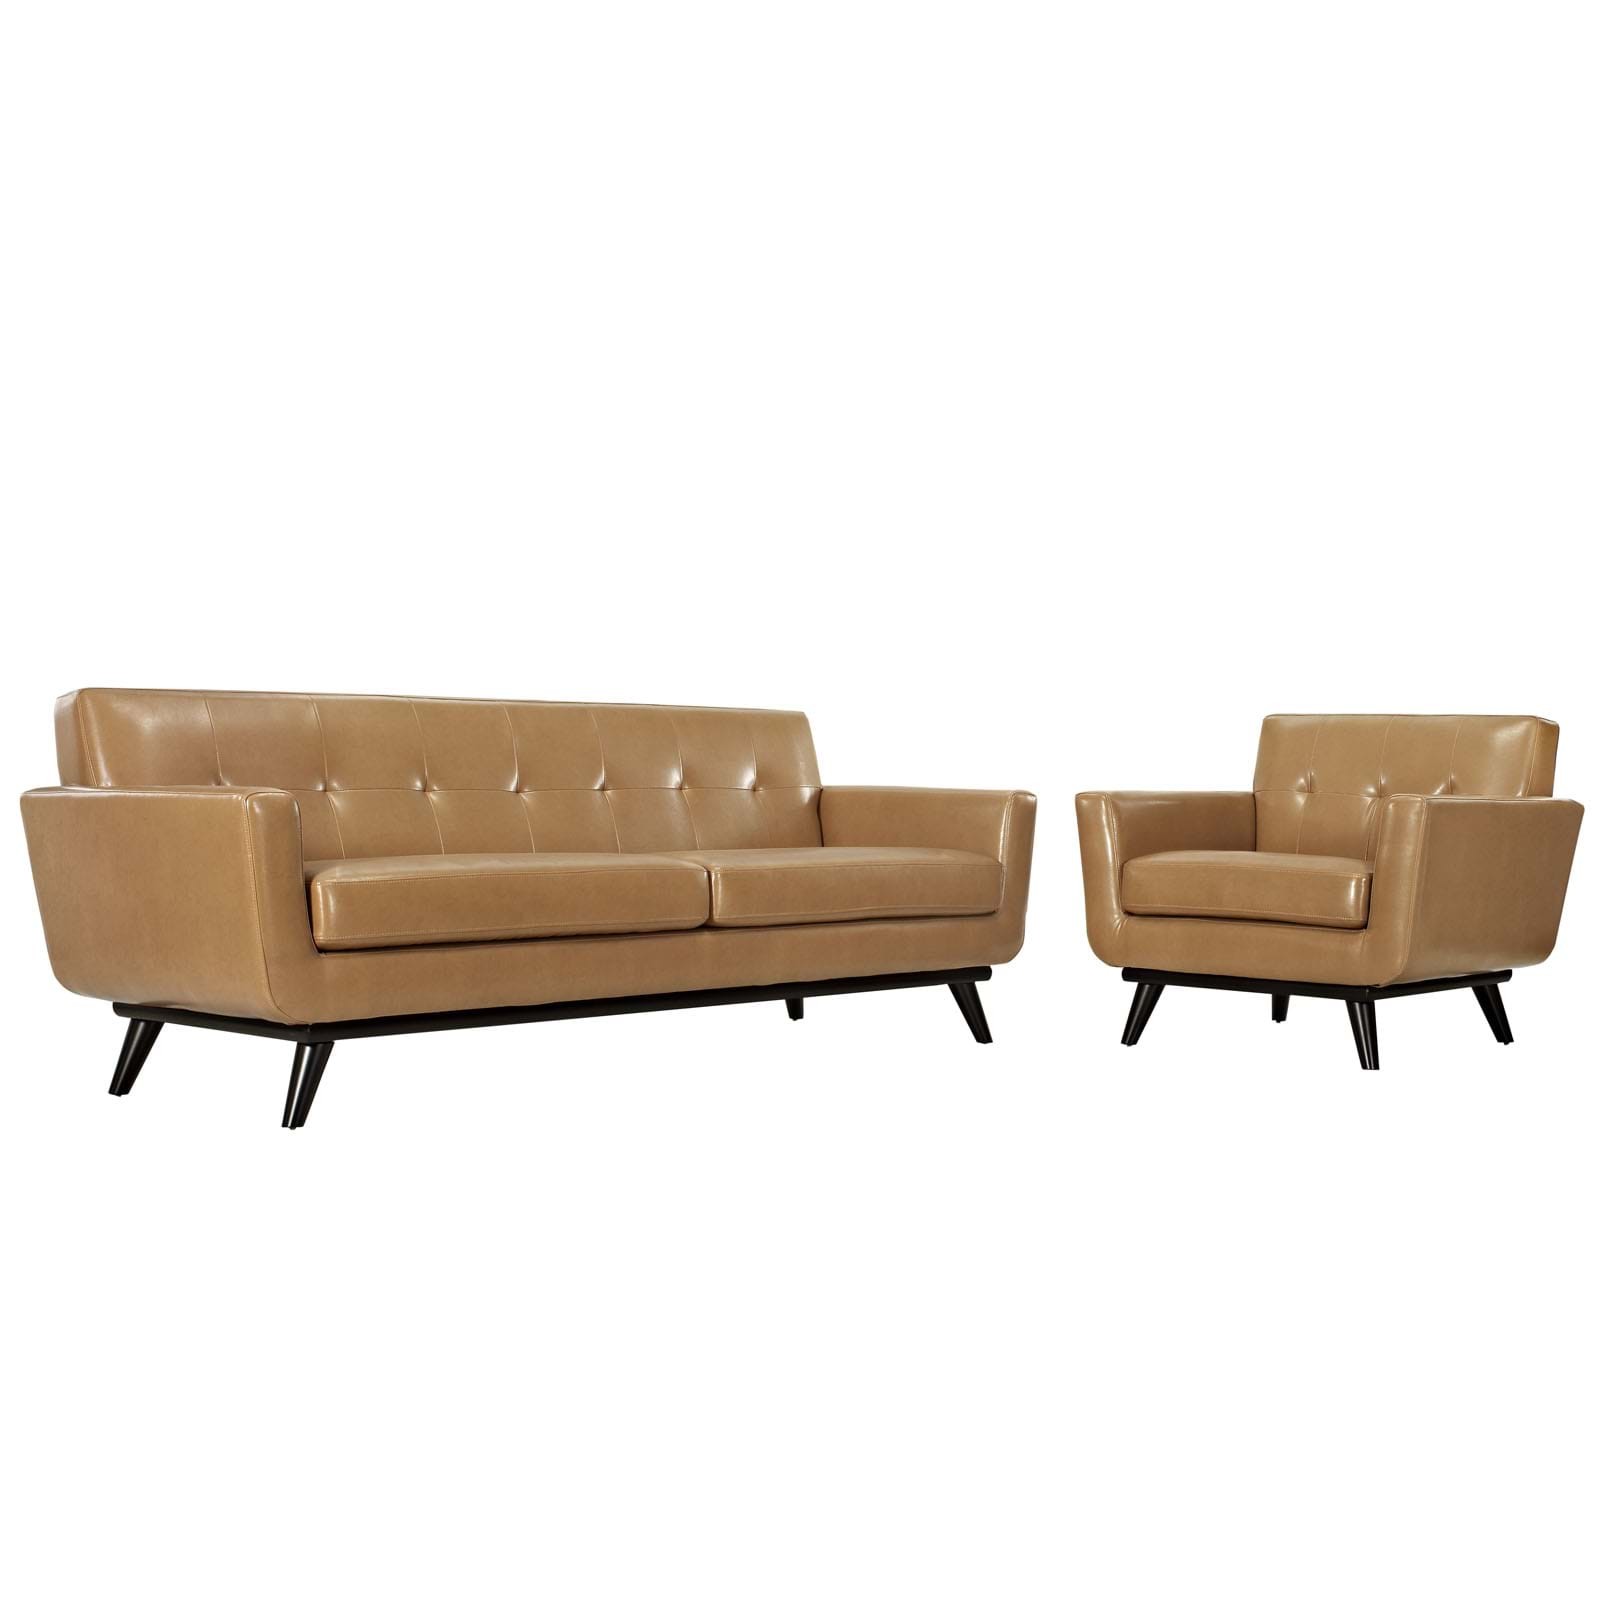 Engage Leather Living Room Set - 2 Piece in TAN